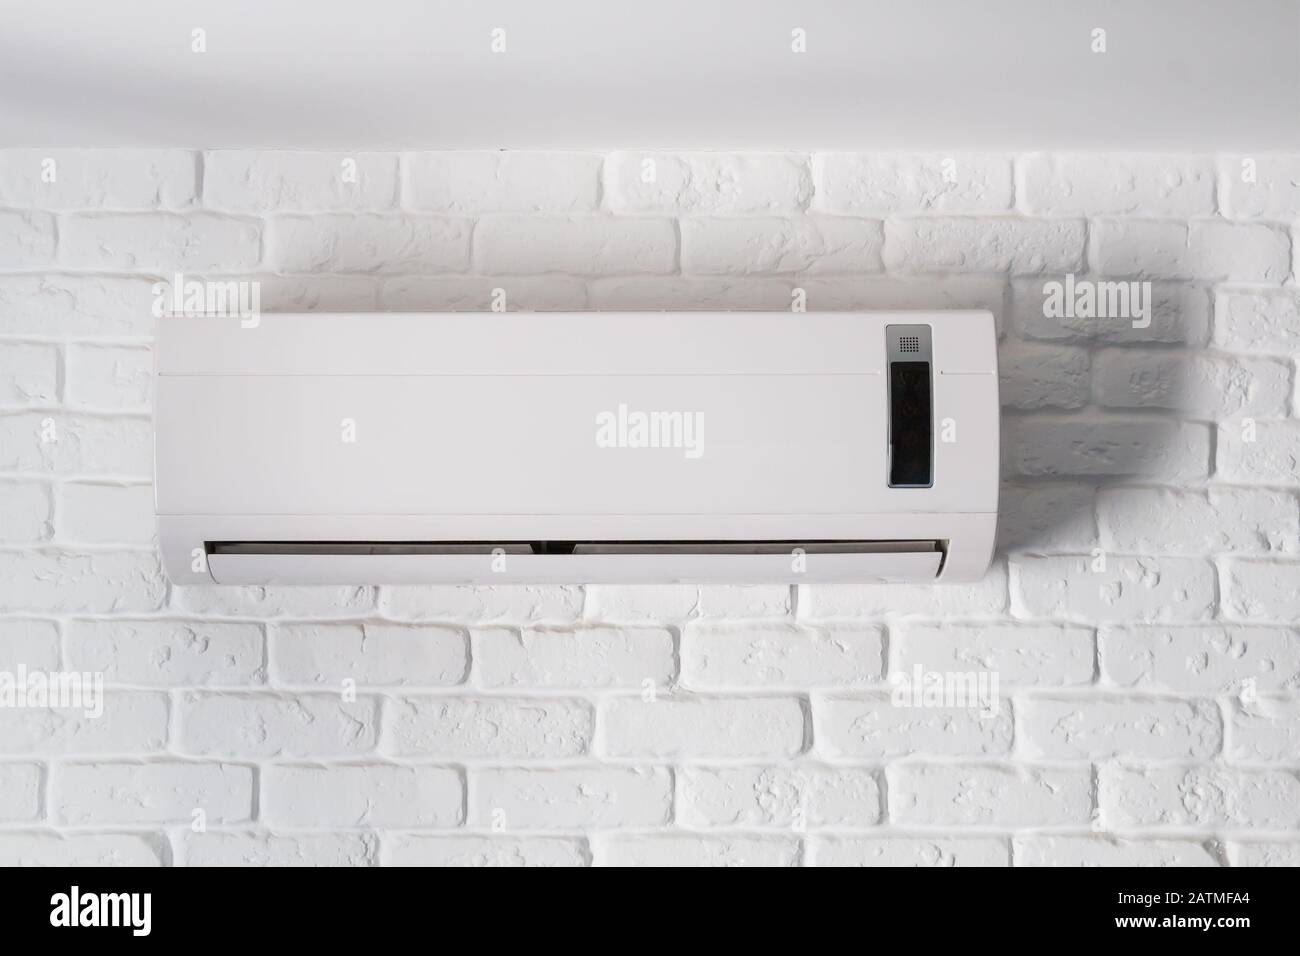 Air conditioner indoor unit mounted on loft style brick wall Stock Photo